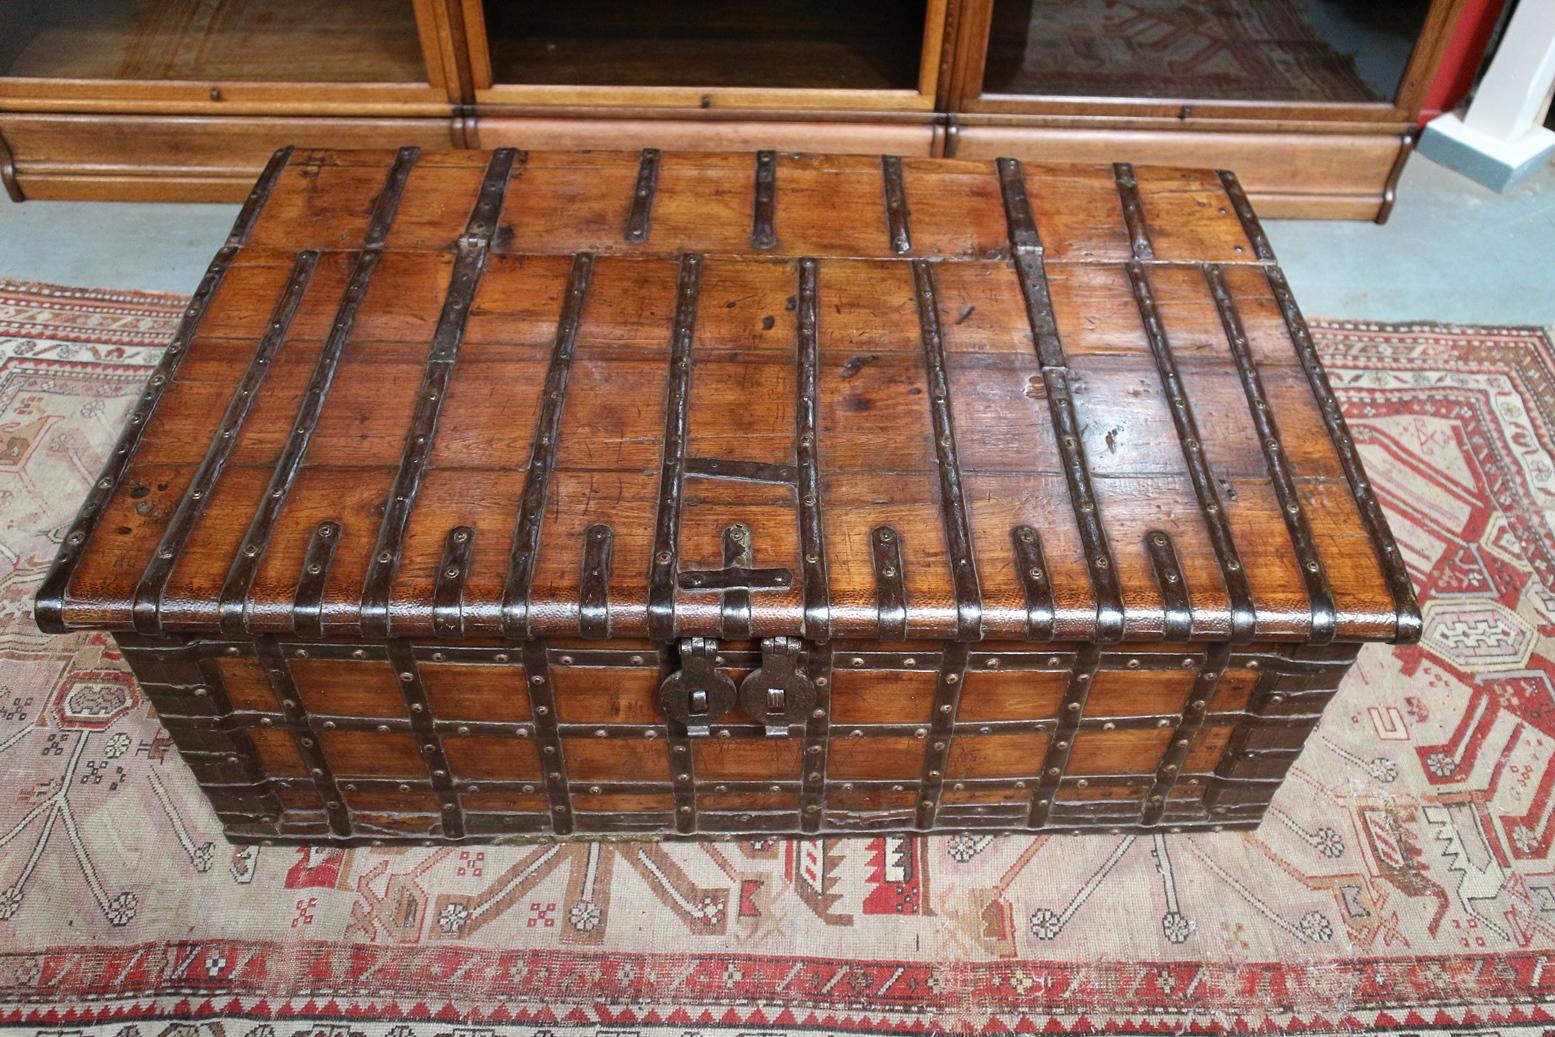 Beautiful antique chest with iron and bronze fittings, good to use as a coffee table.
Origin: Colonial India
Period: circa 1860
Size: 127cm x 78cm x H.48cm.